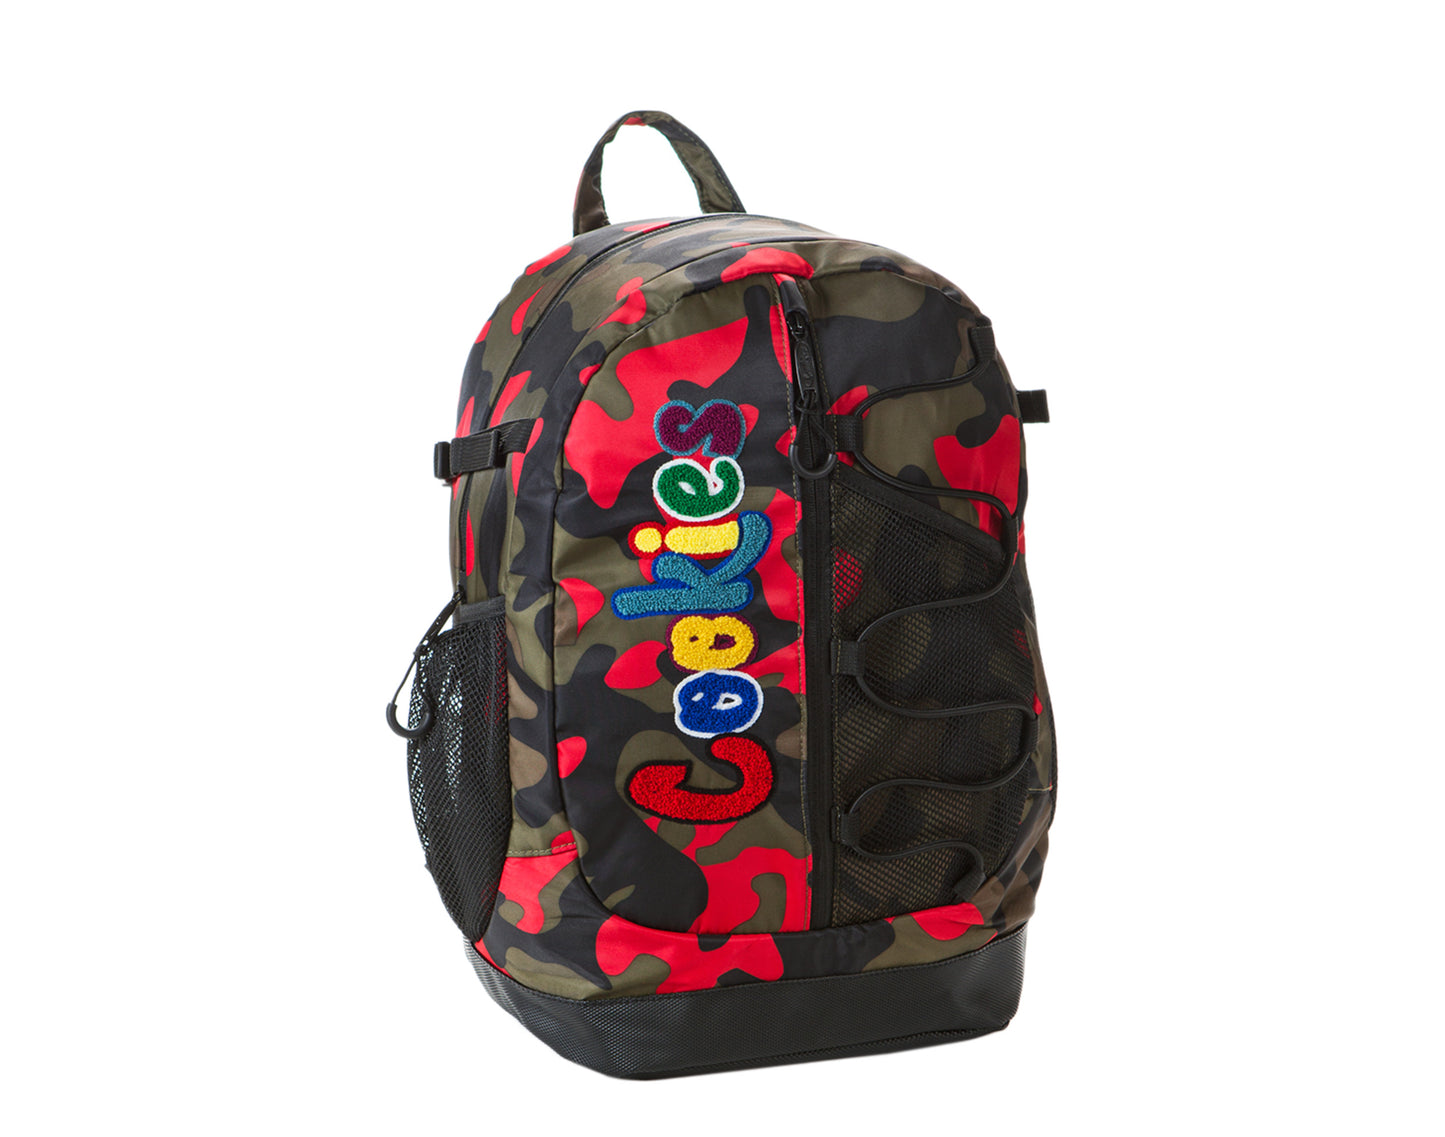 Cookies The Bungee Red Camo Backpack 1546A4404-RDC